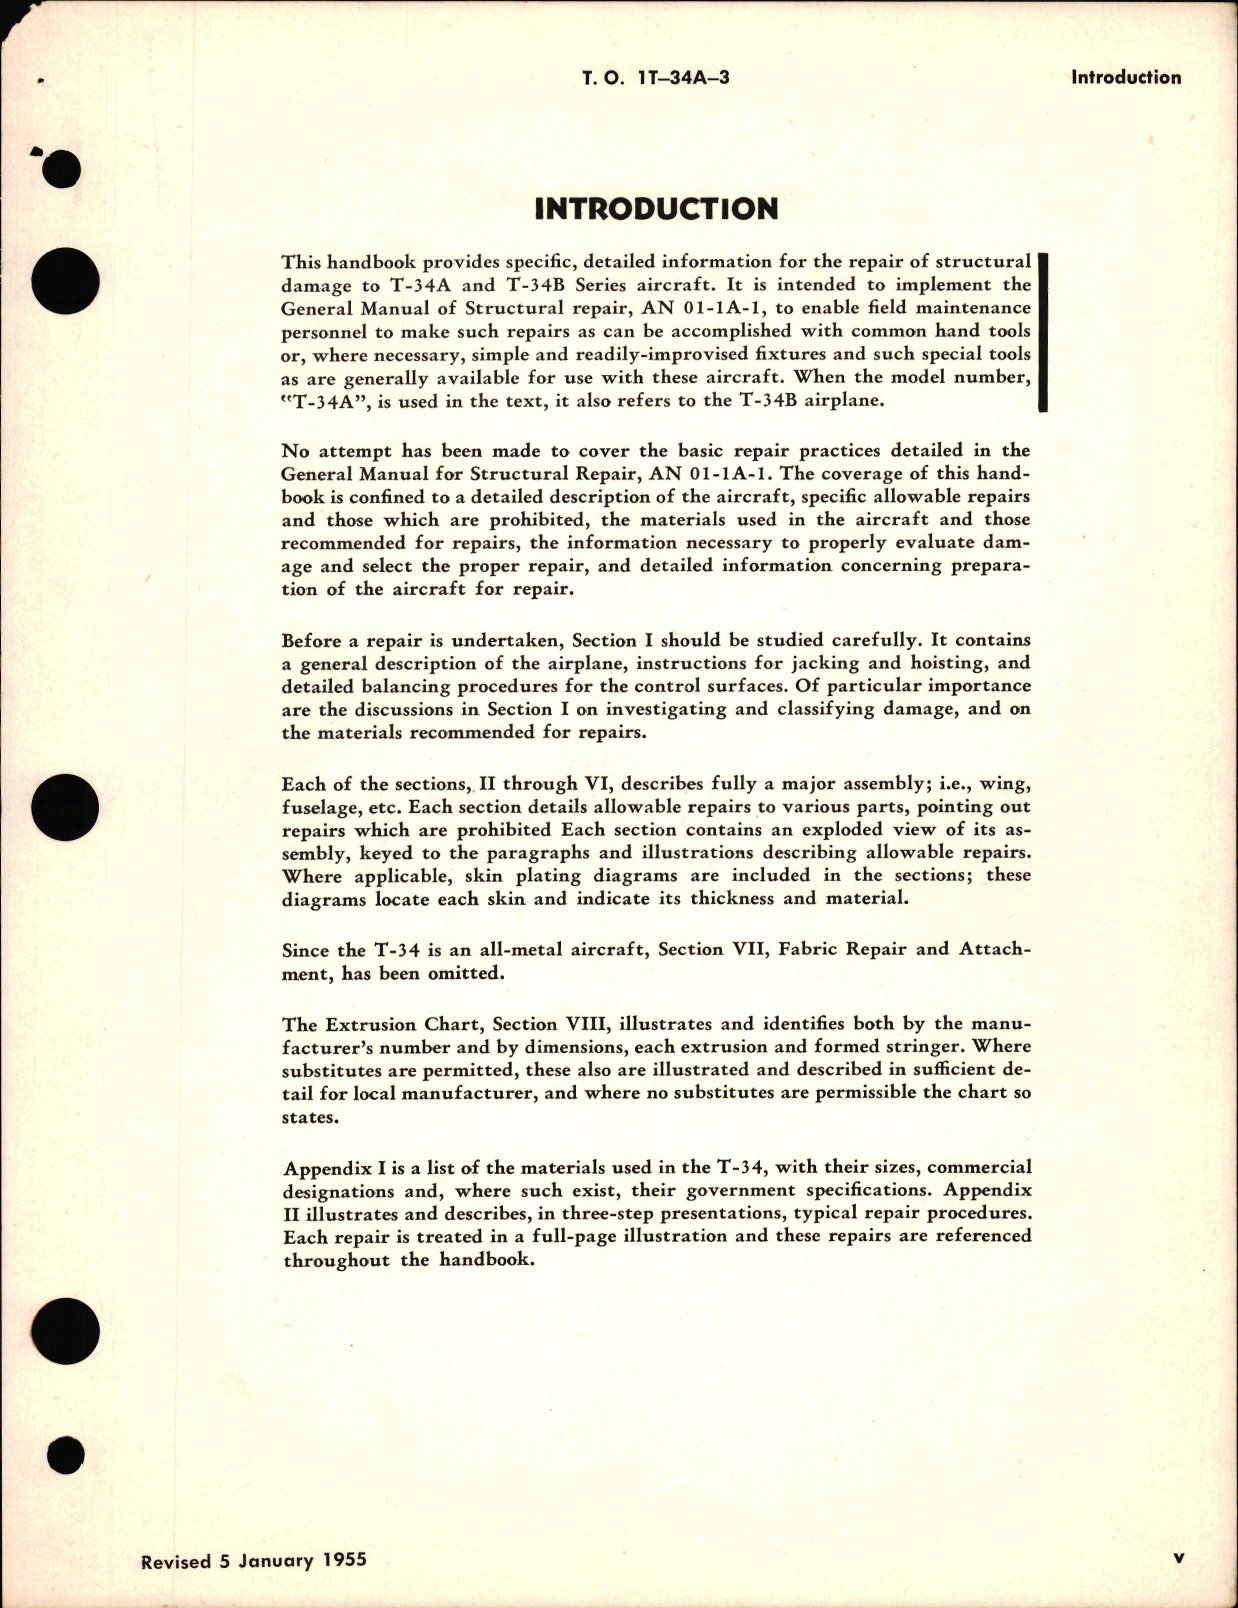 Sample page 7 from AirCorps Library document: Structural Repair Instructions for T-34A and T-34B